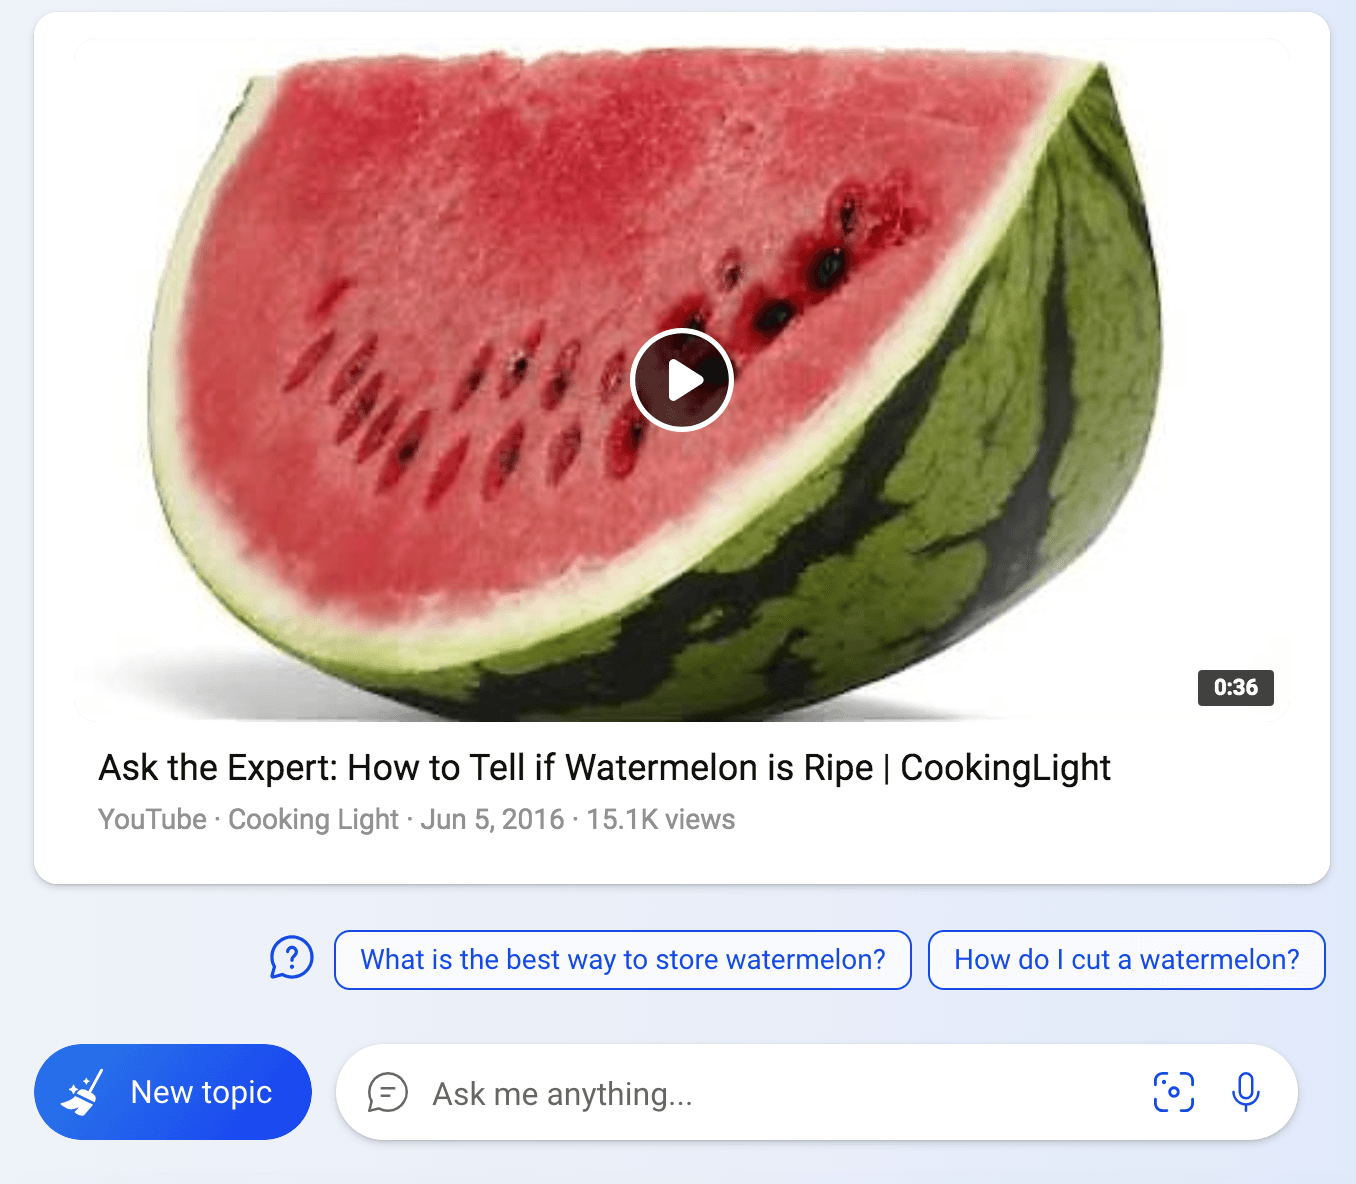 Watermelon query to Bing generating a video of a watermelon